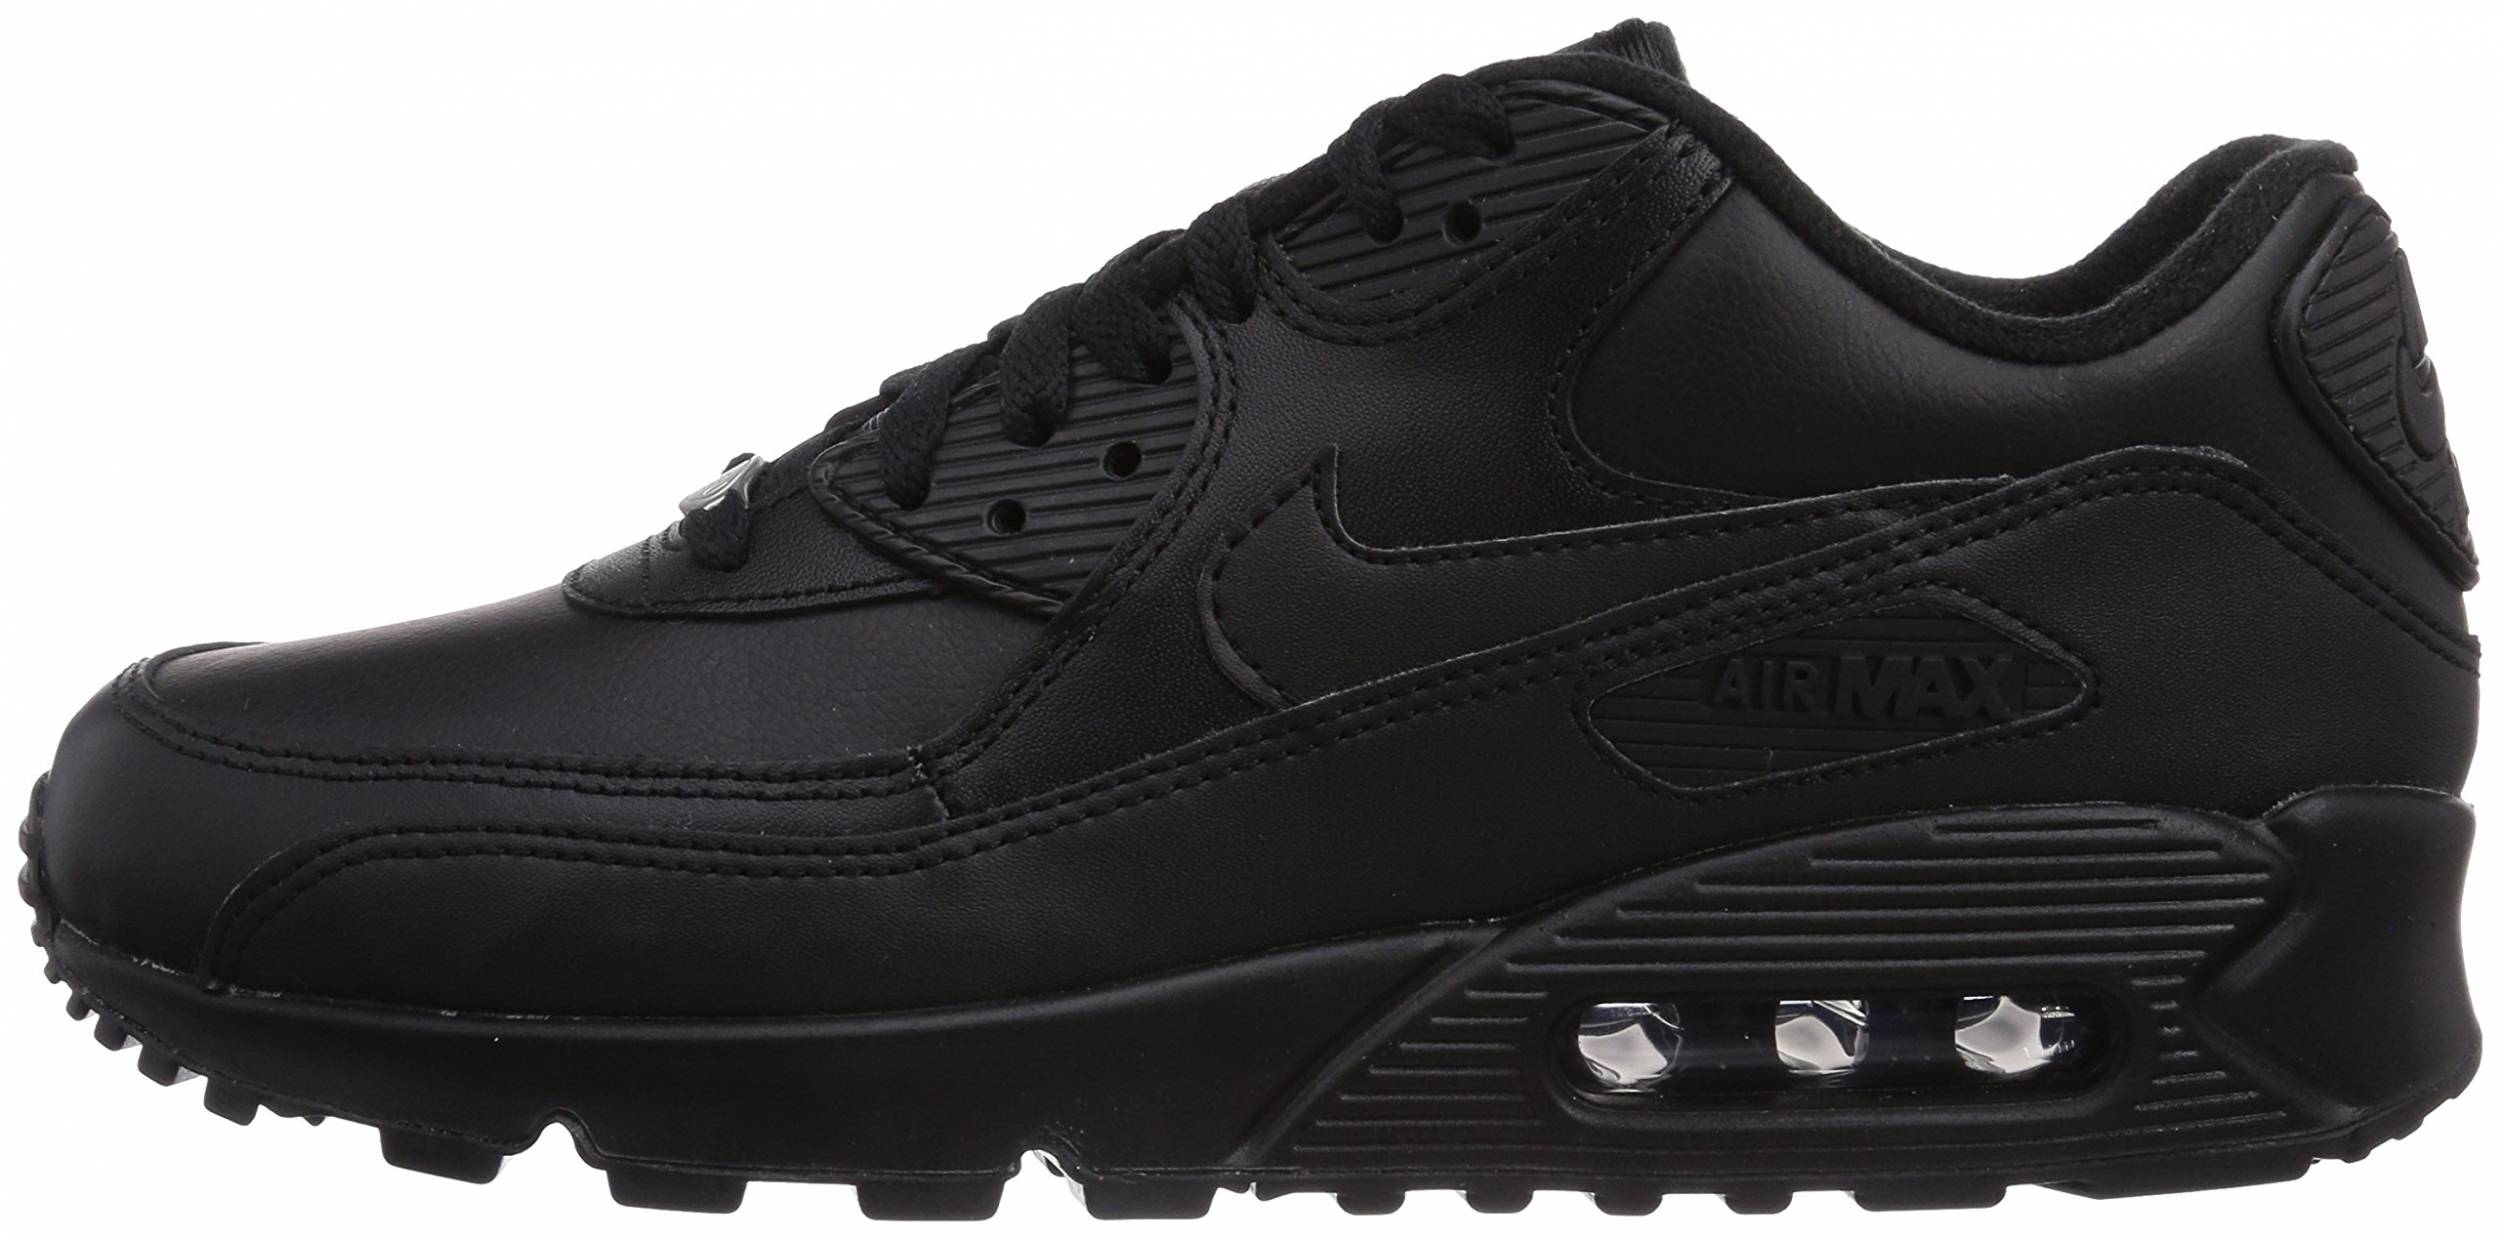 Save 30% on Nike Air Max 90 Sneakers 